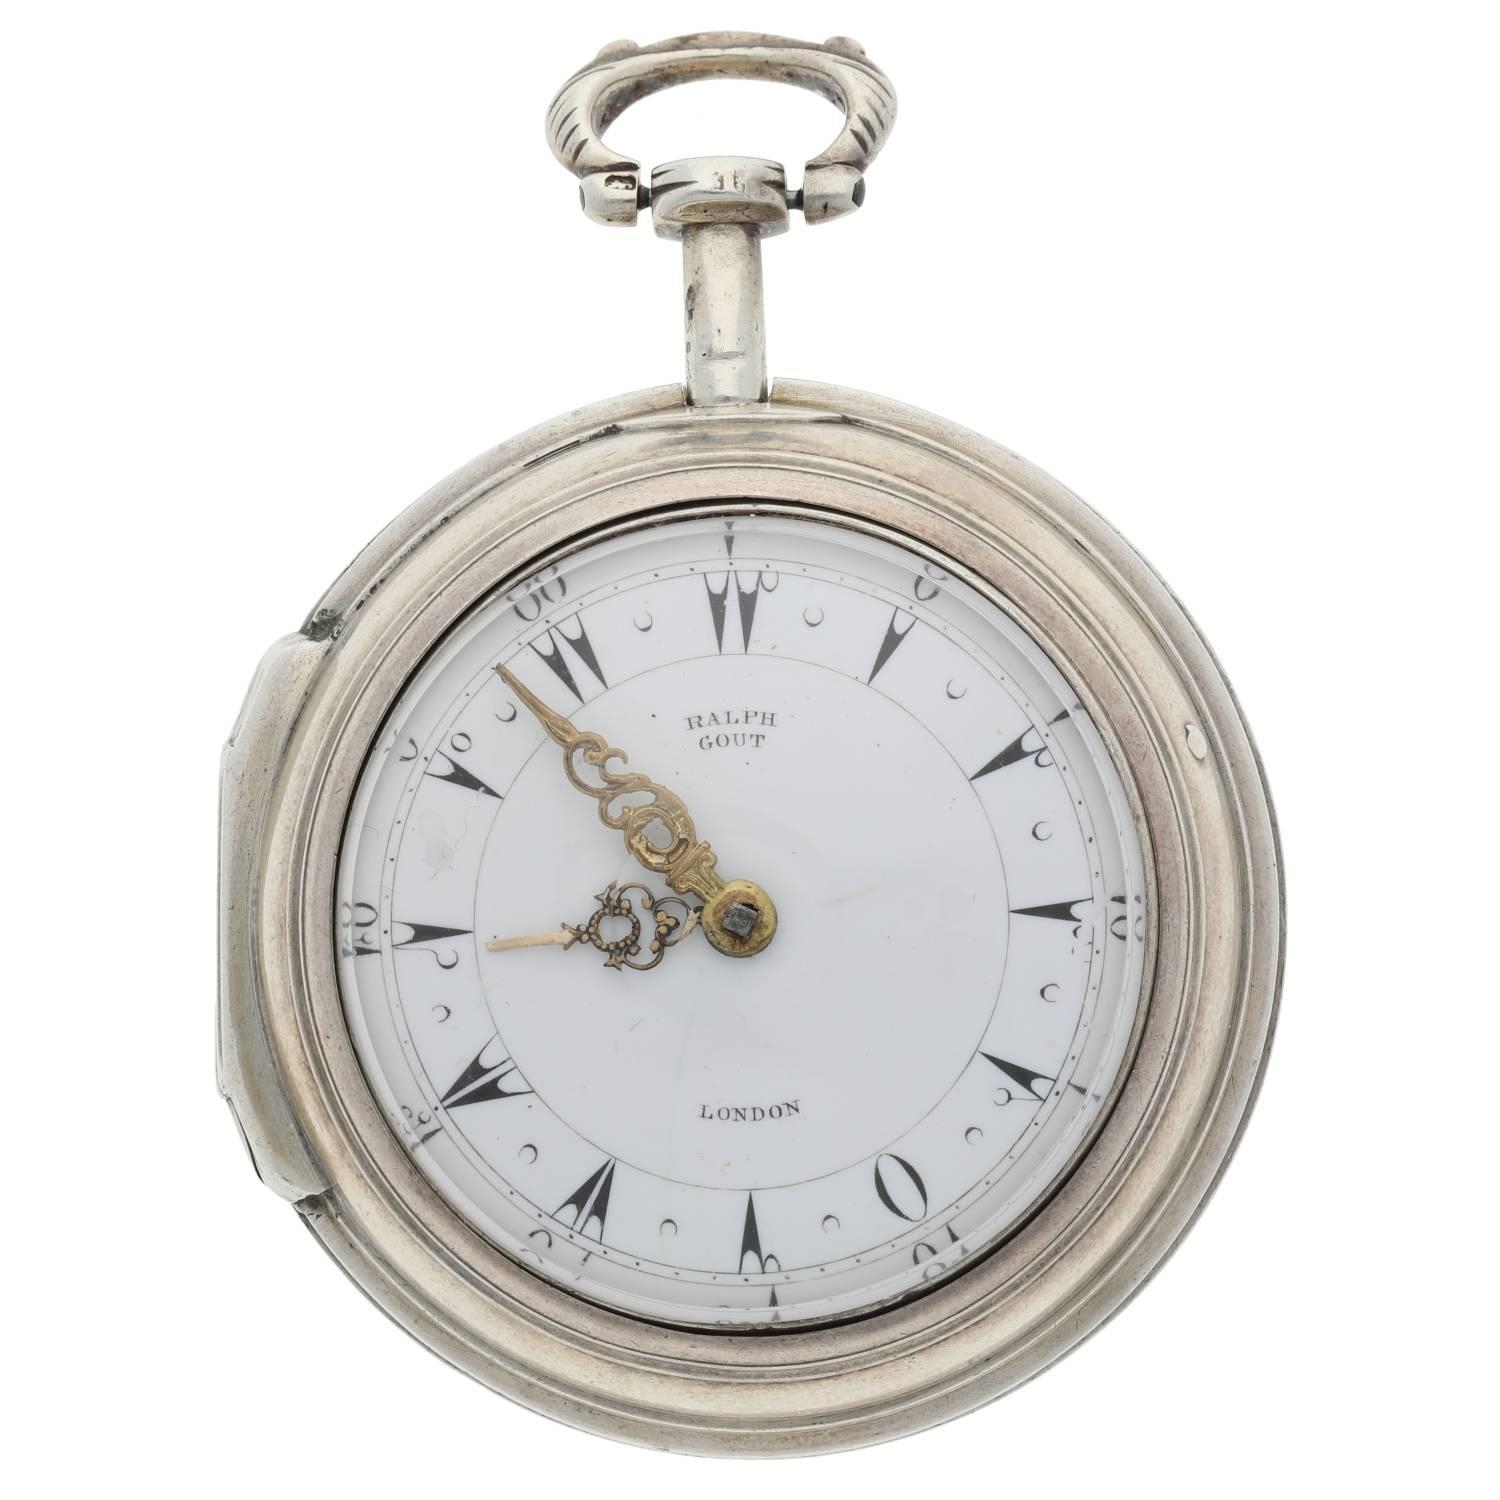 Ralph Gout, London - early 19th century silver and tortoiseshell triple cased verge pocket watch - Image 3 of 13